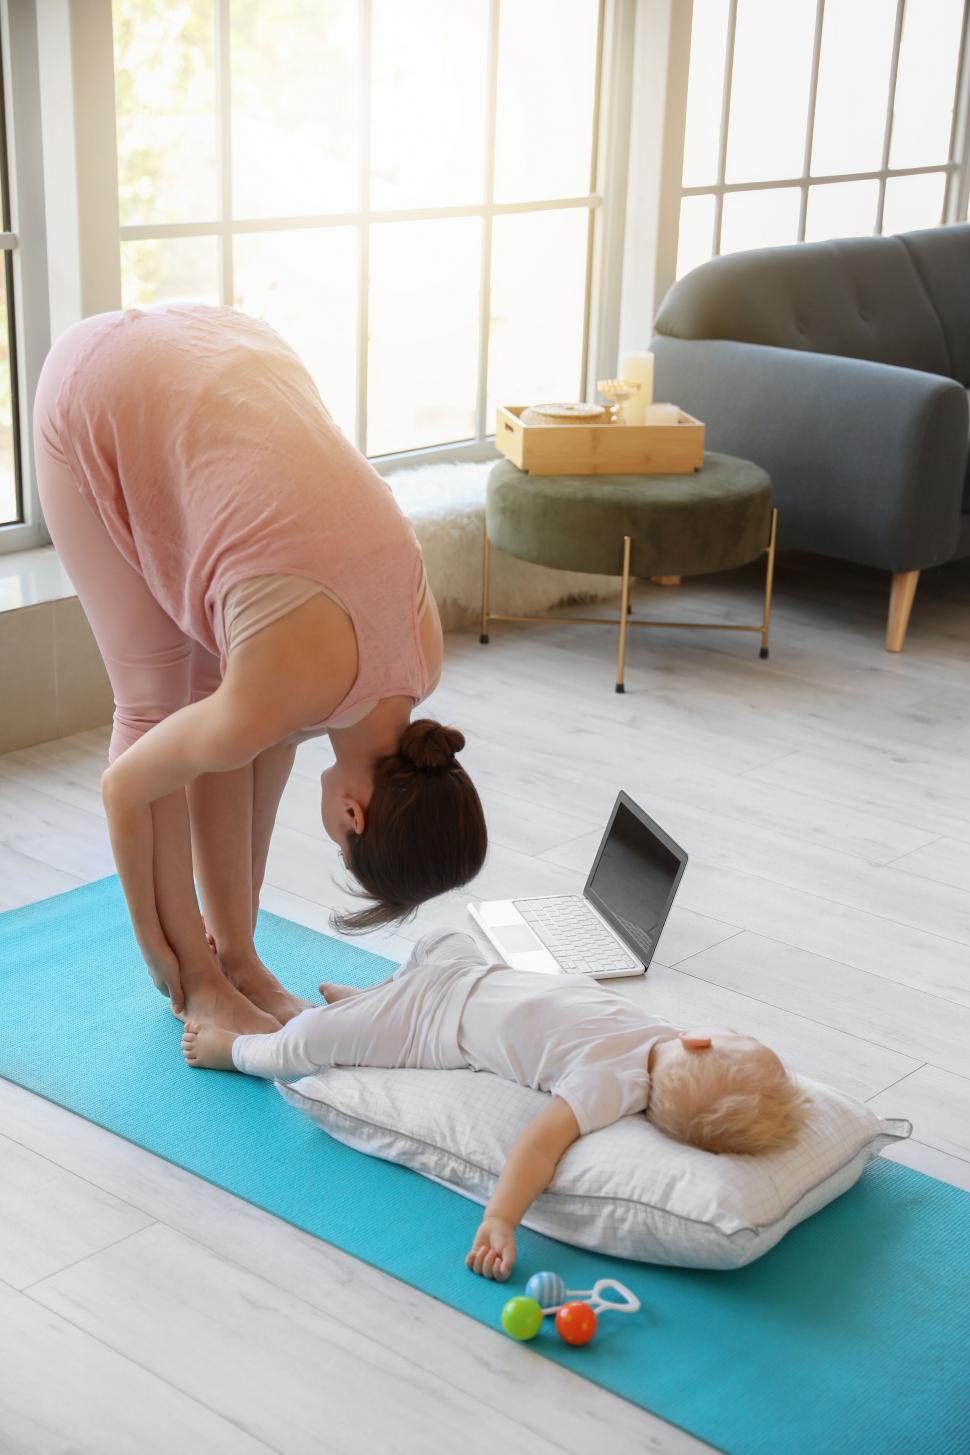 Free Image of Practicing yoga stretches near a sleeping child 